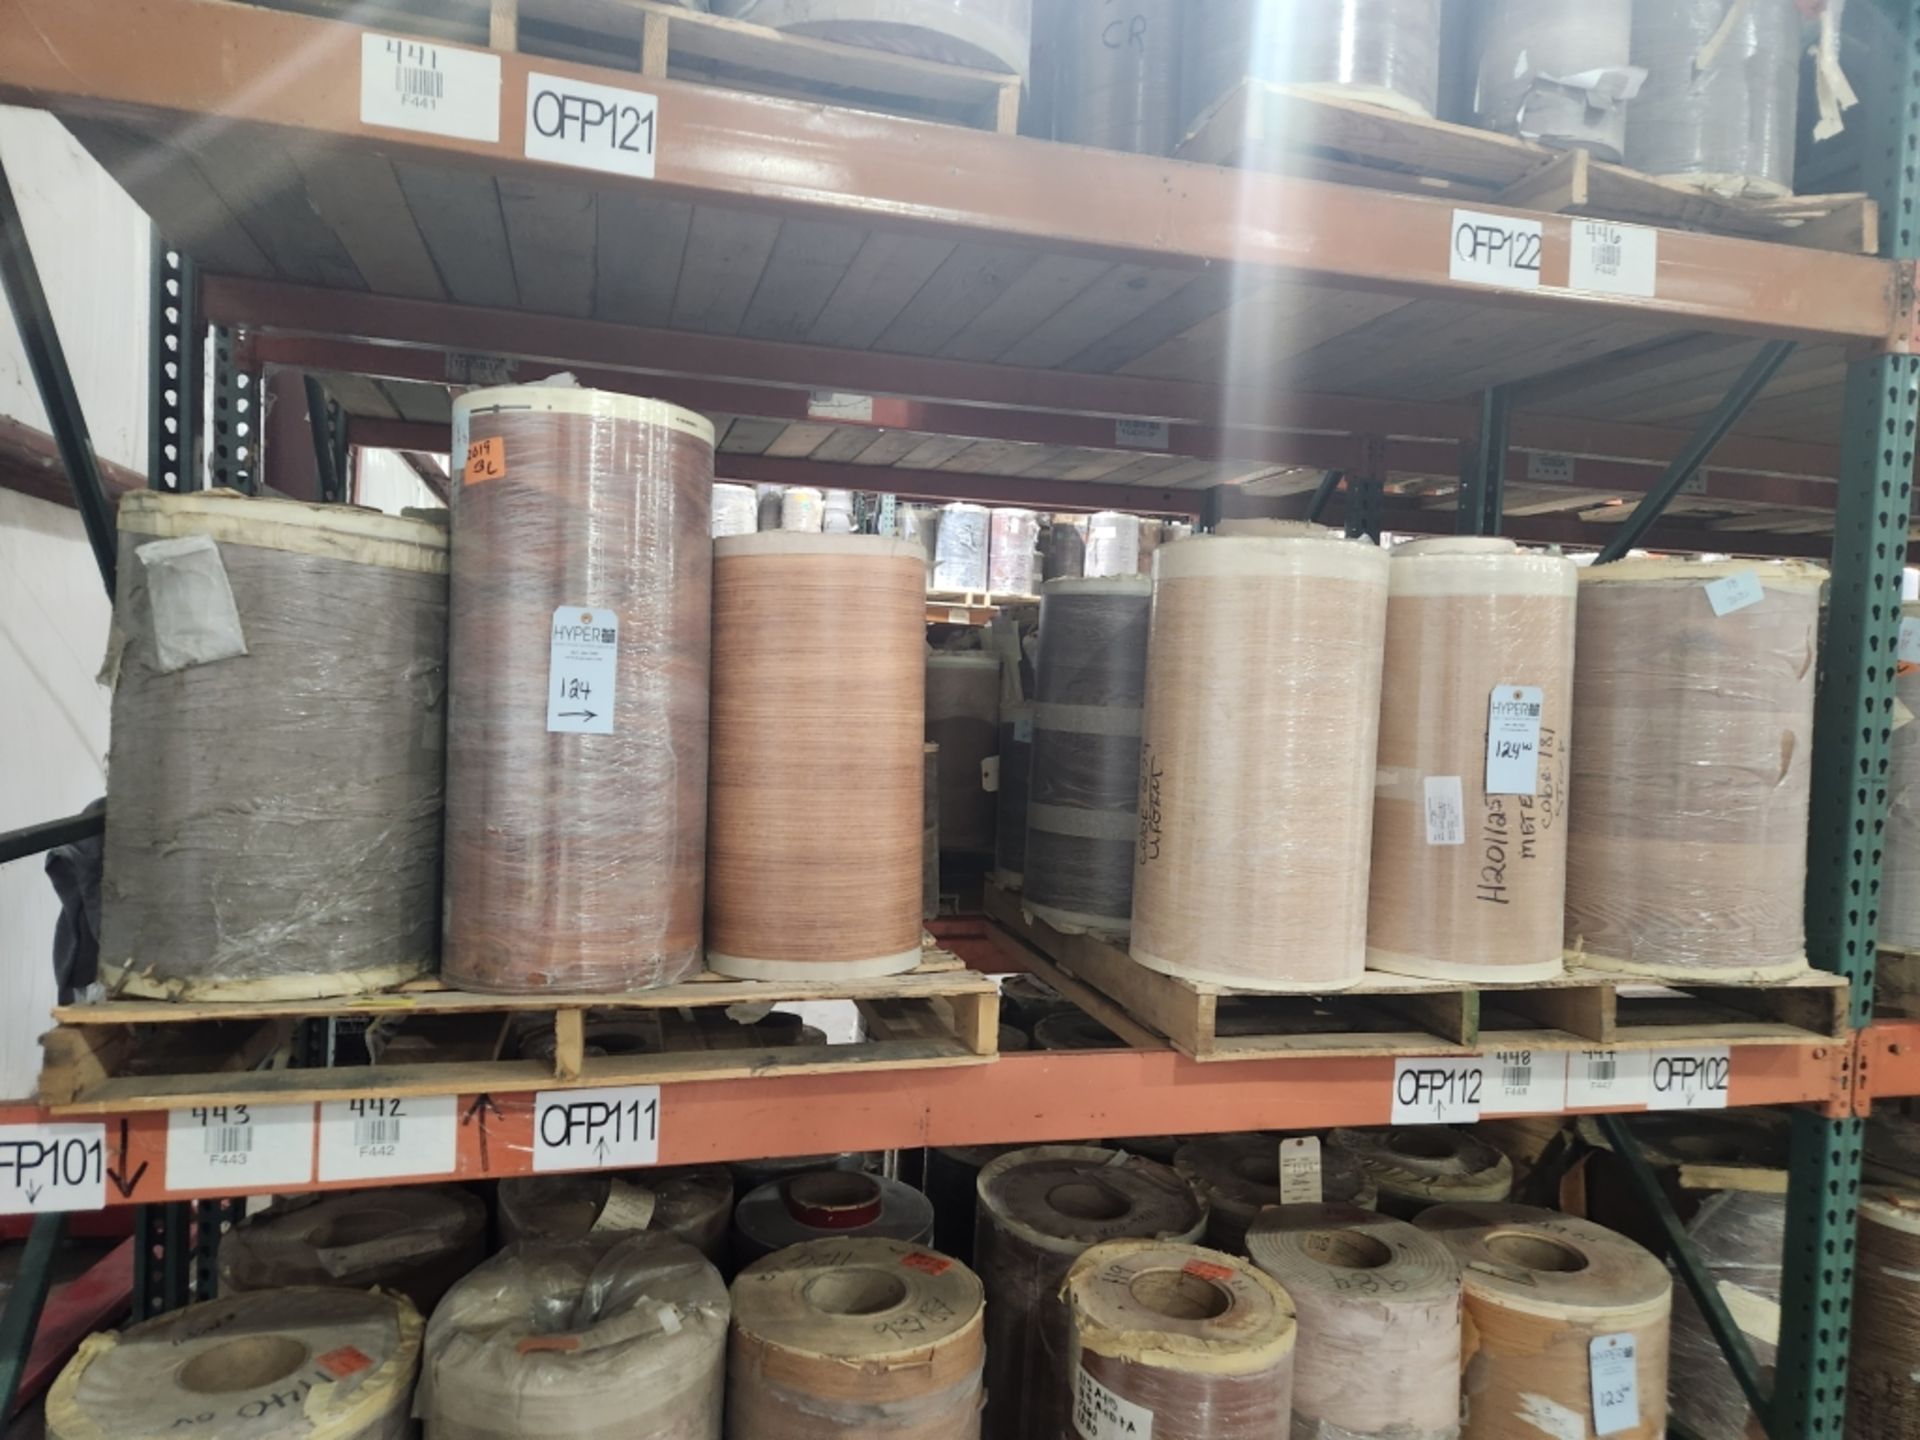 10 Pallets- (98) rolls of finished paper, various colors and sizes. See photos of product listing.